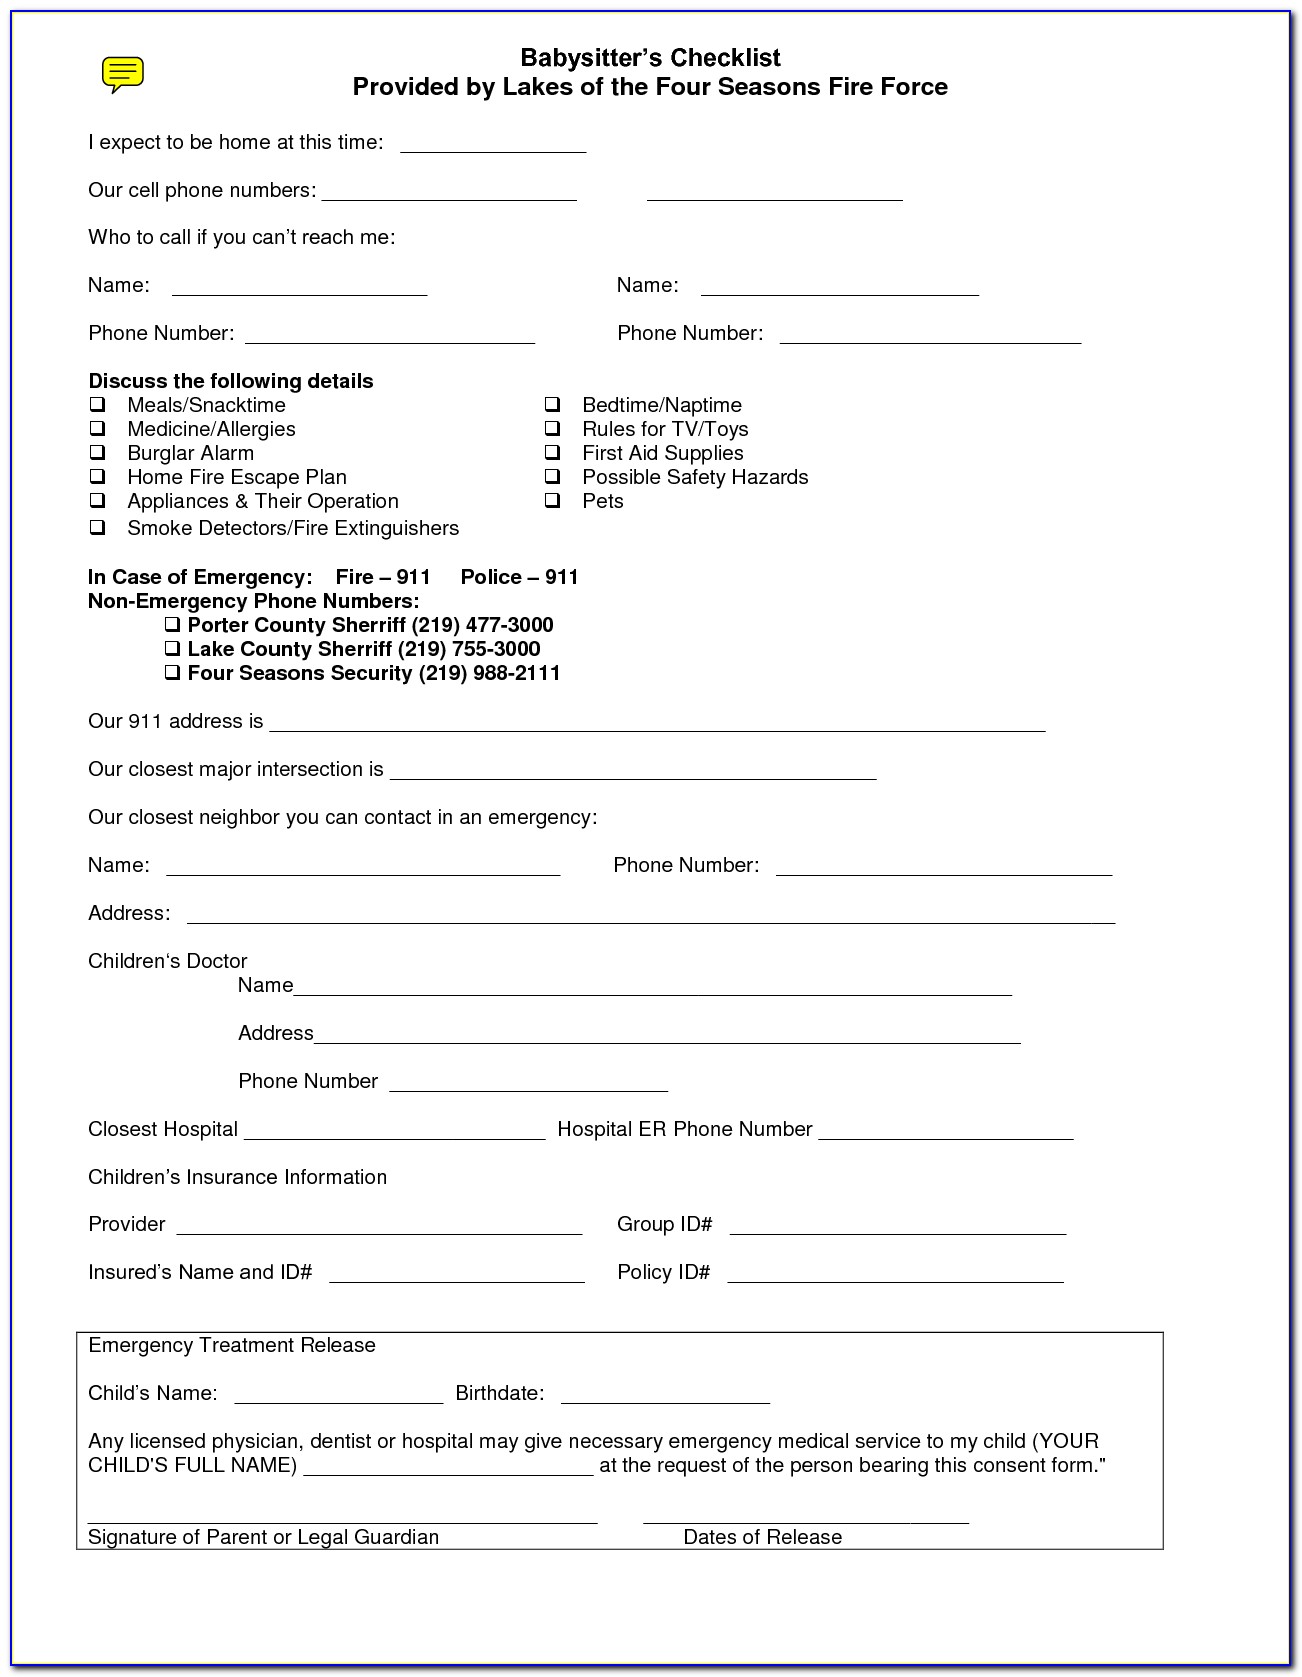 Medical Consent Form For Child While Parents Are Away